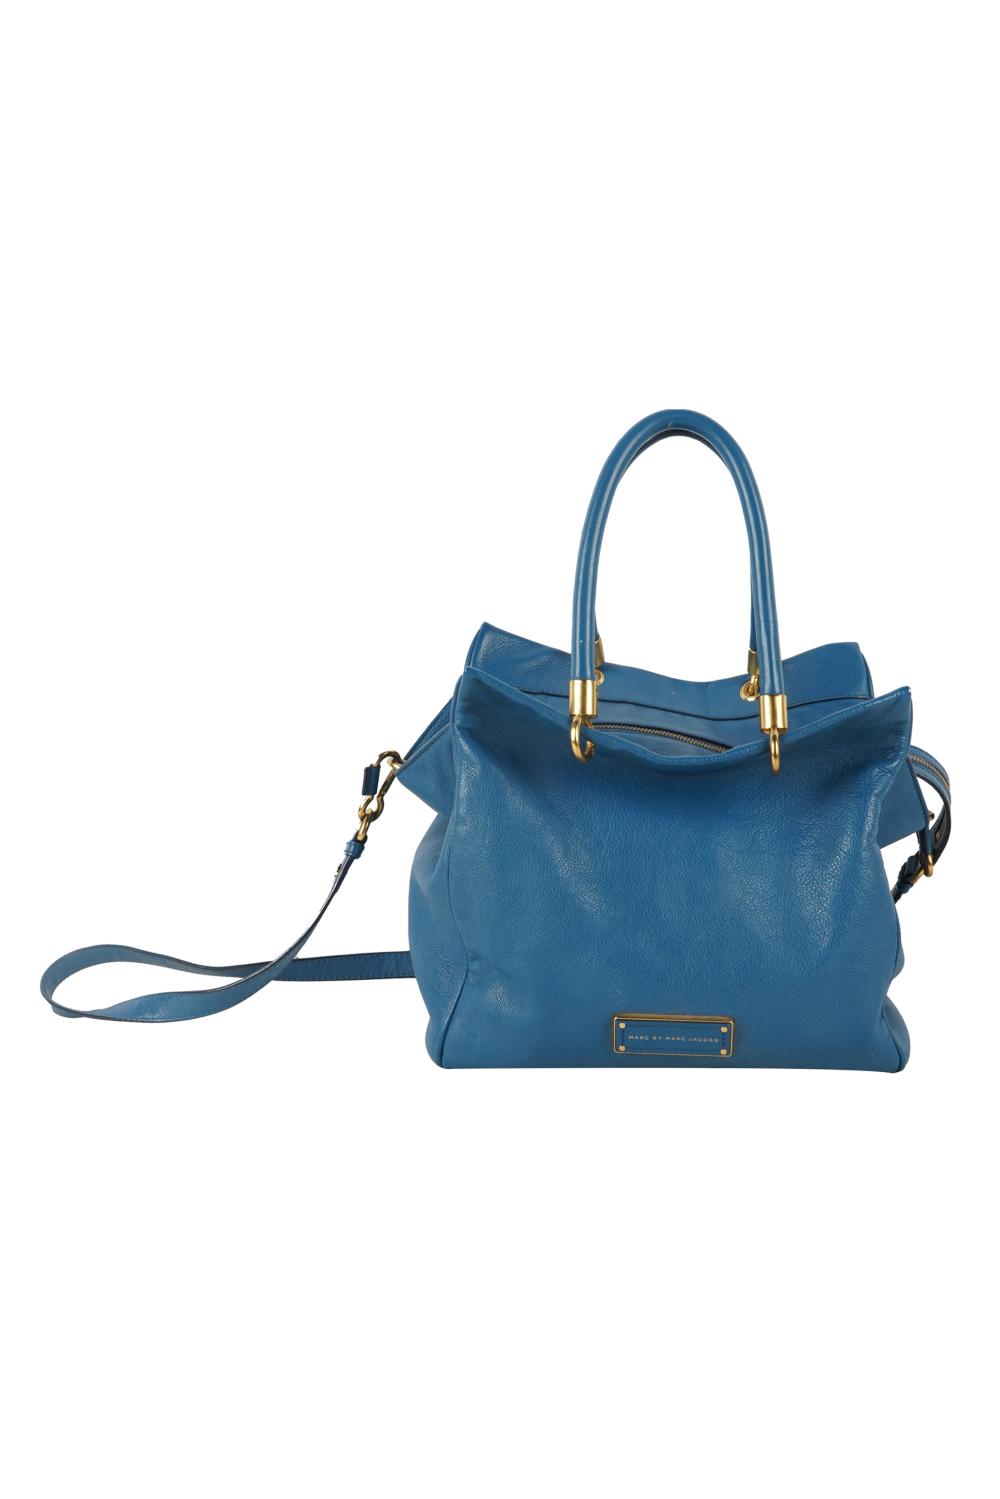 MARC JACOBS BLUE HANDBAGwith double 332f03